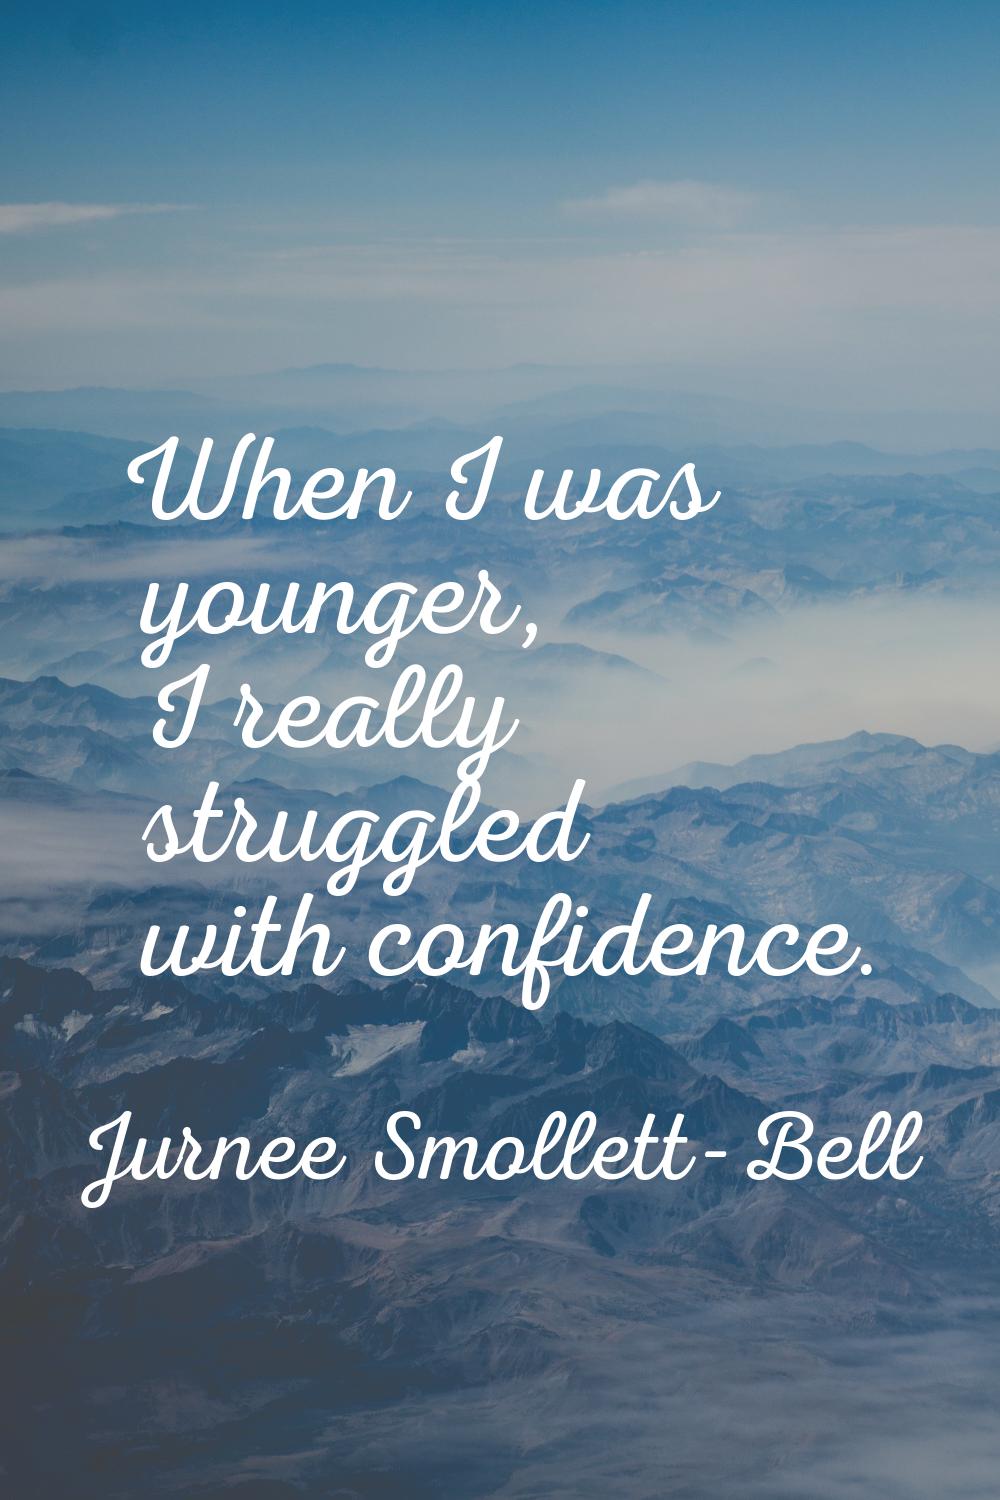 When I was younger, I really struggled with confidence.